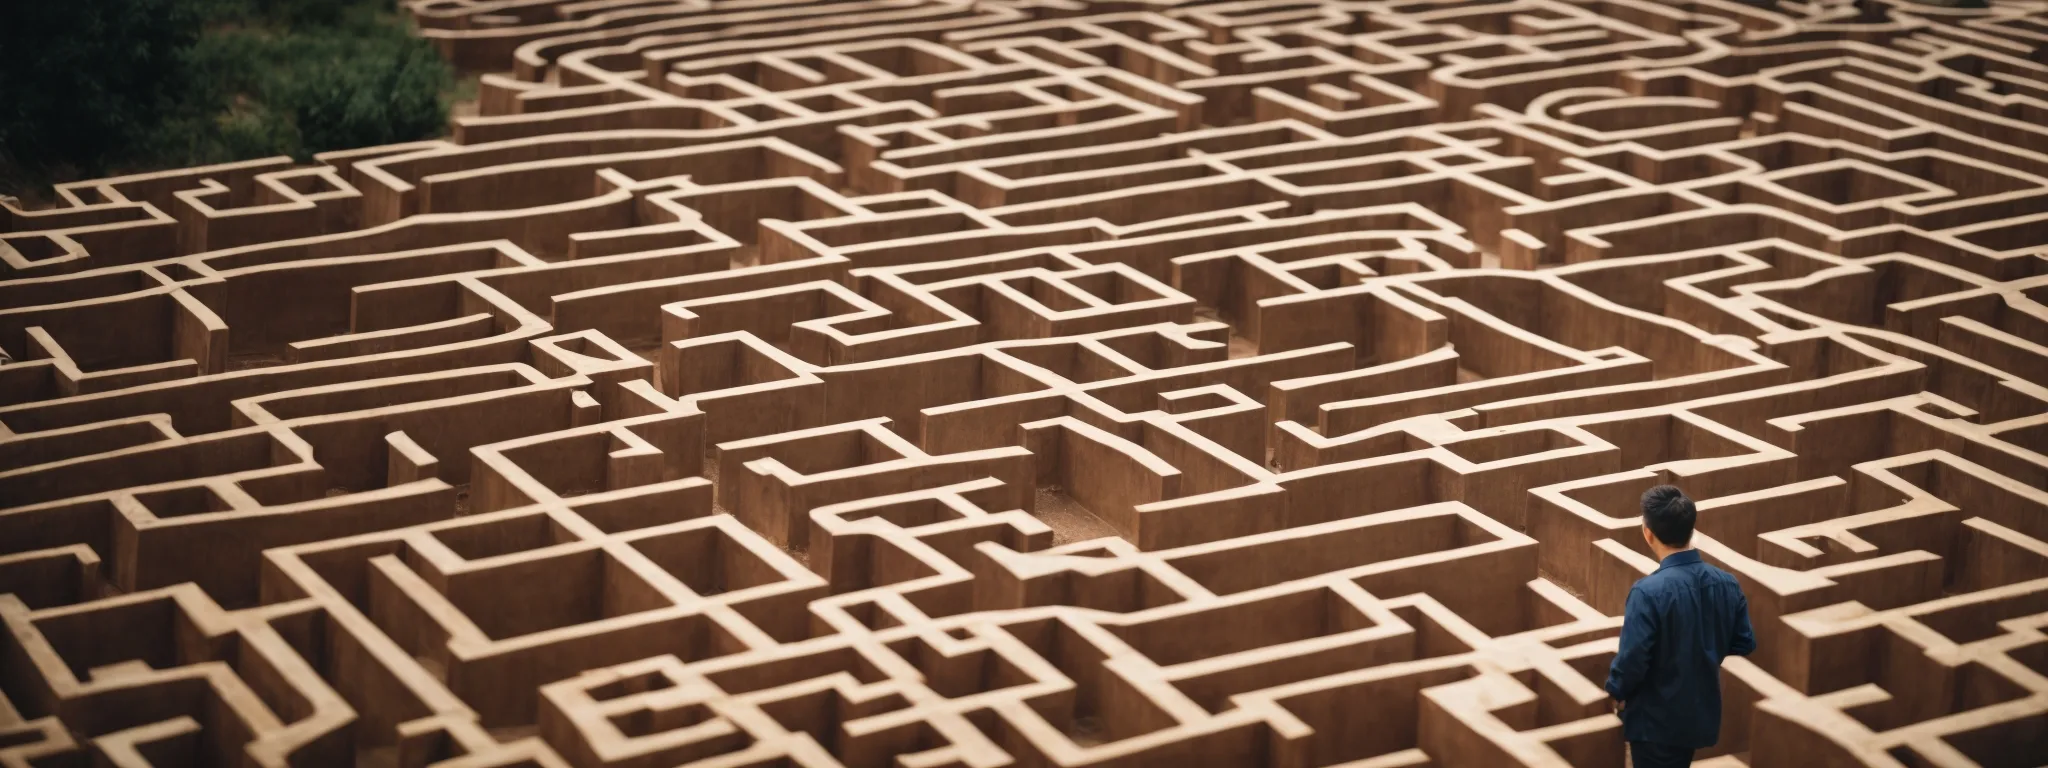 a cautious individual scrutinizing a complex maze signifies the careful navigation required in the deceptive world of seo.